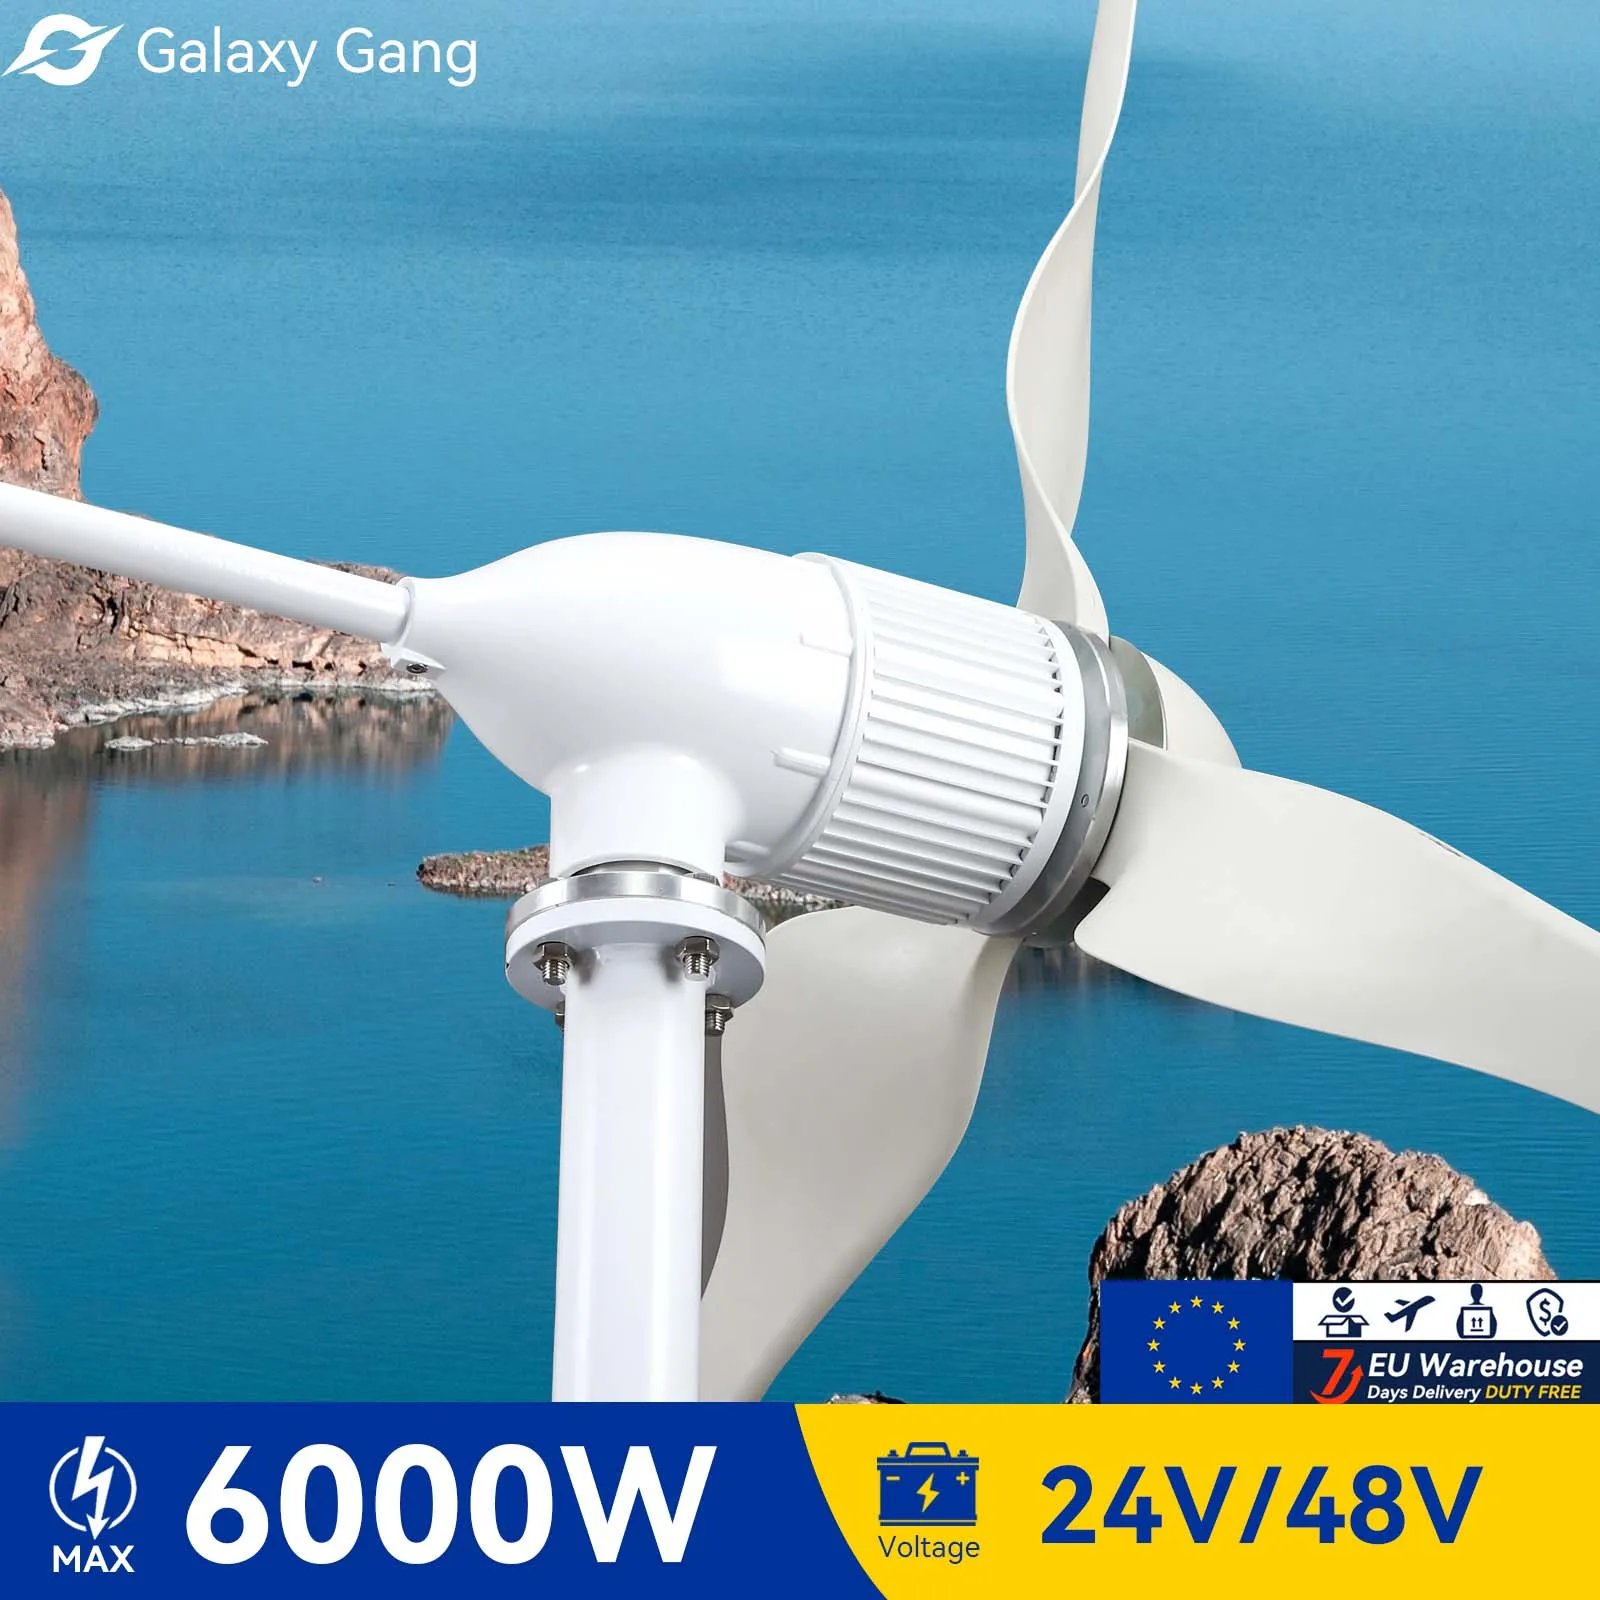 

5Days EU Delivery Galaxy Gang 6000w Windmill Turbine GeneratorKit 6kw Power 3 Blade 24V 48V With MPPT Charger Hybrid System